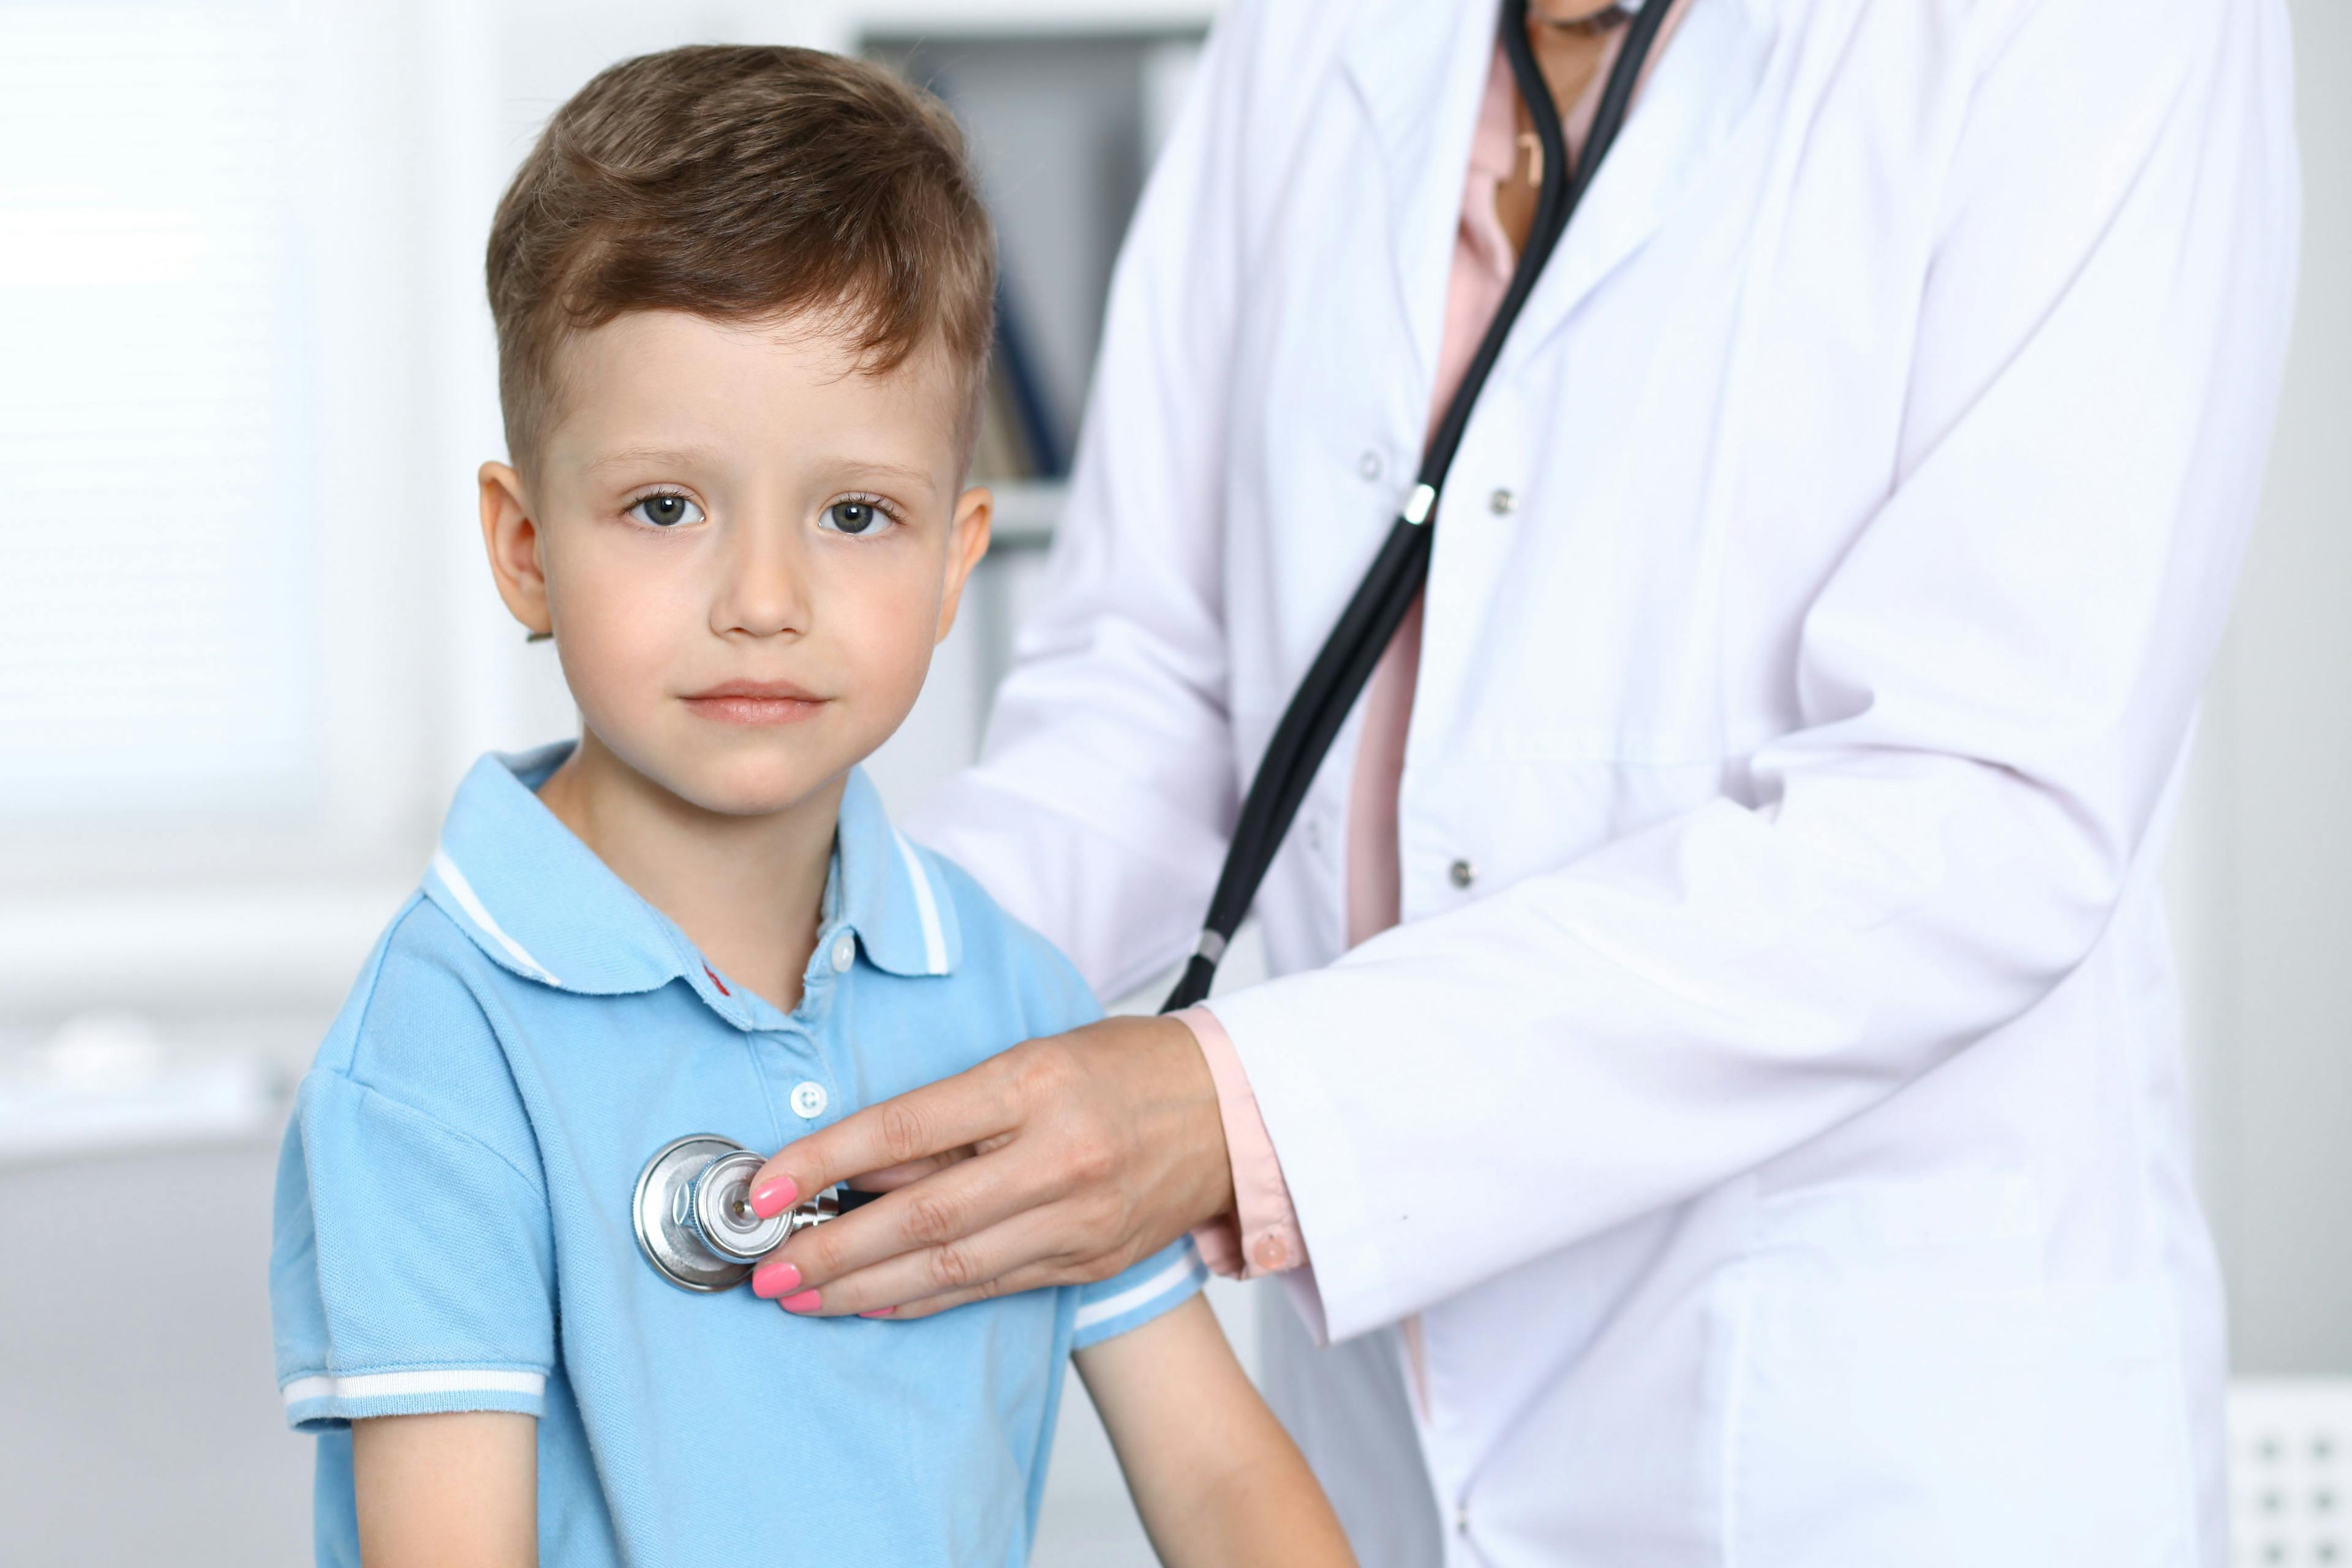 Study: Repeated Antibiotic Exposure in Early Childhood Associated with Higher BMI